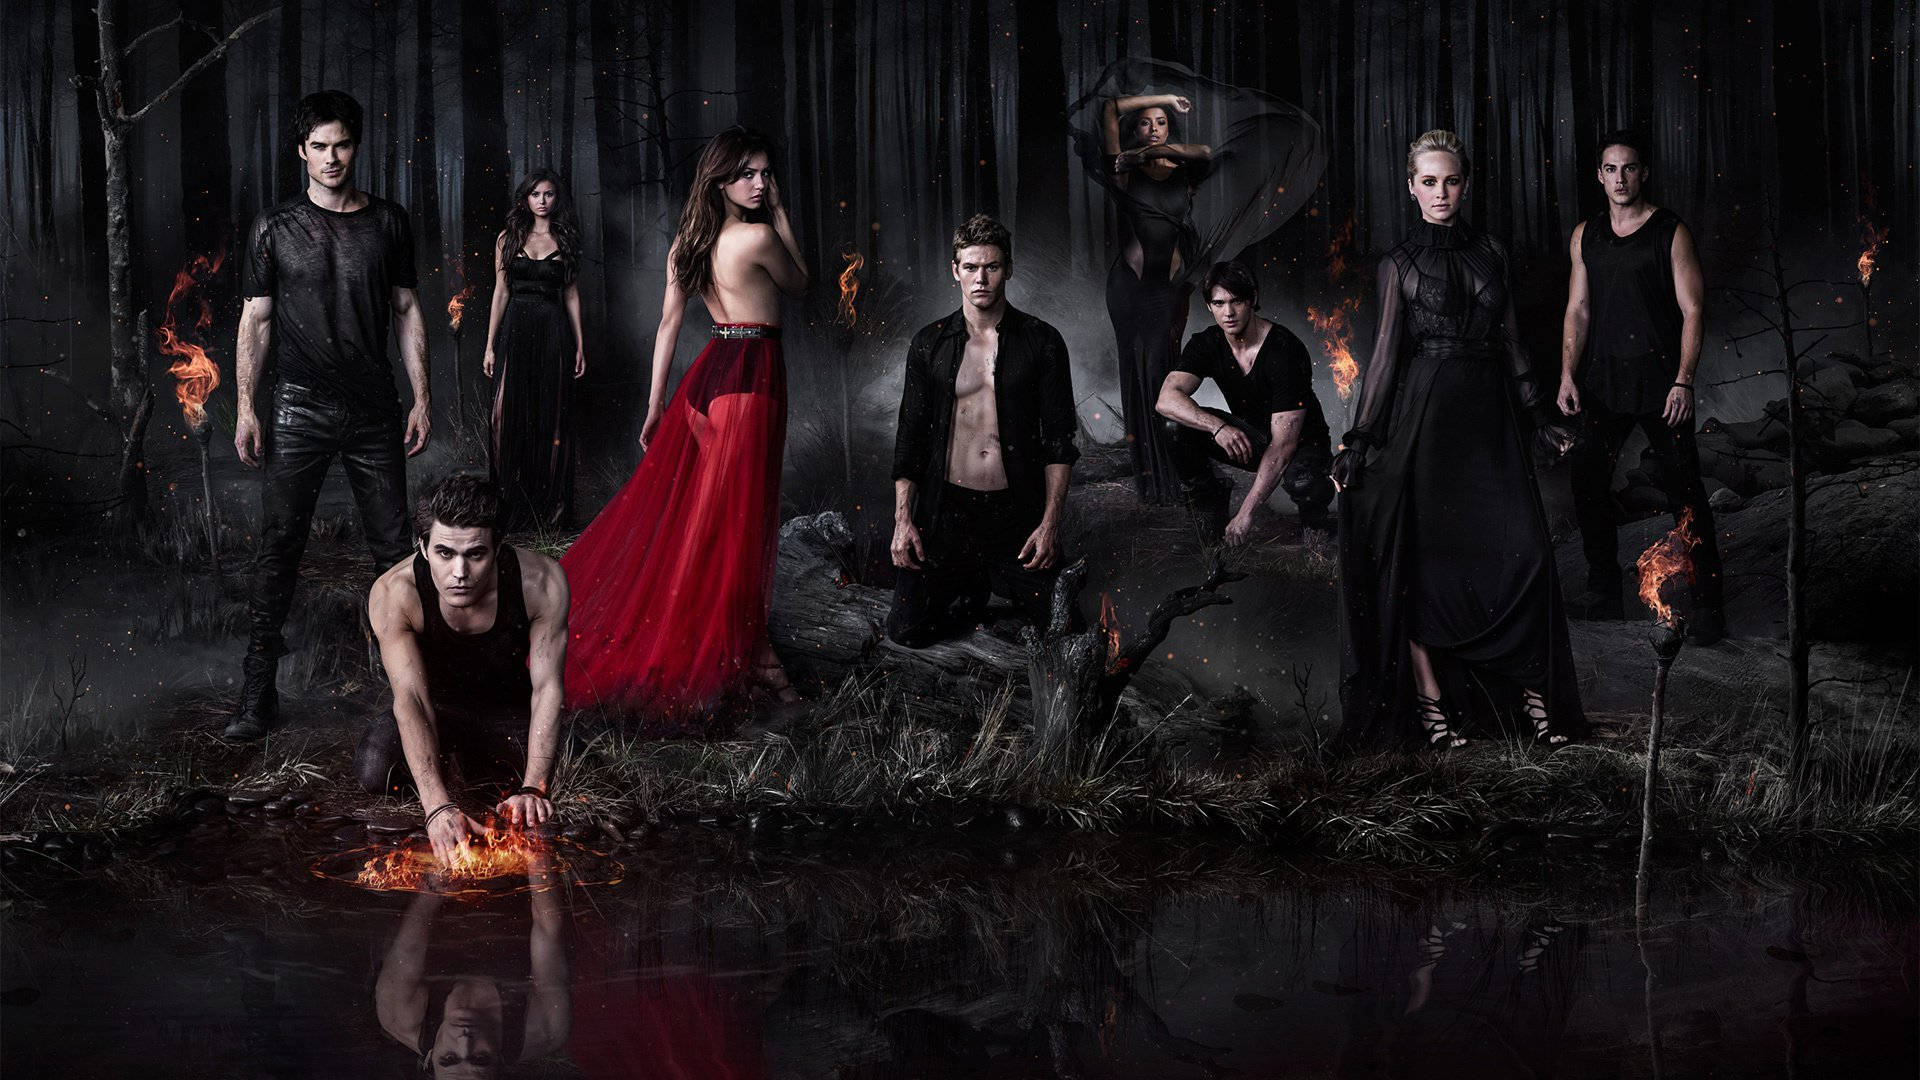 The Vampire Diaries Characters In Dark Forest